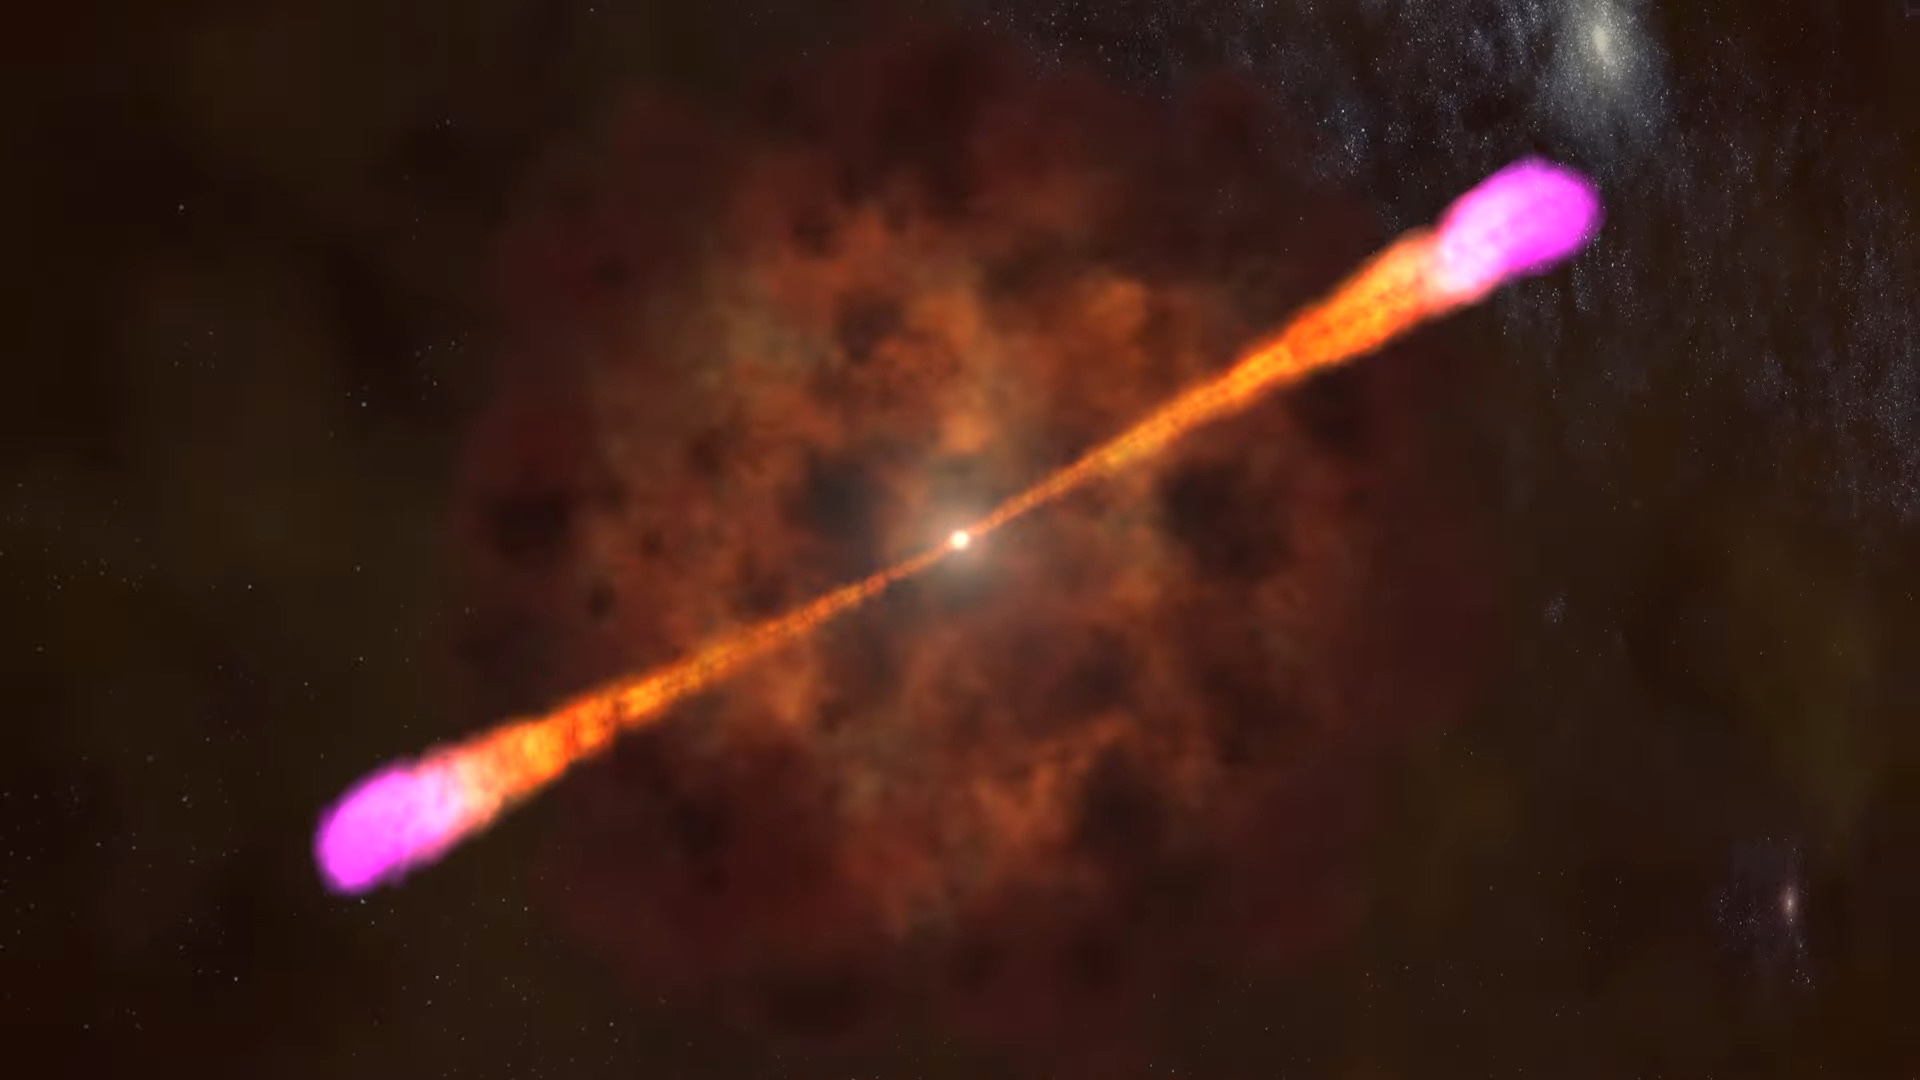 Brightest gamma-ray burst ever captured continues to baffle scientists ...